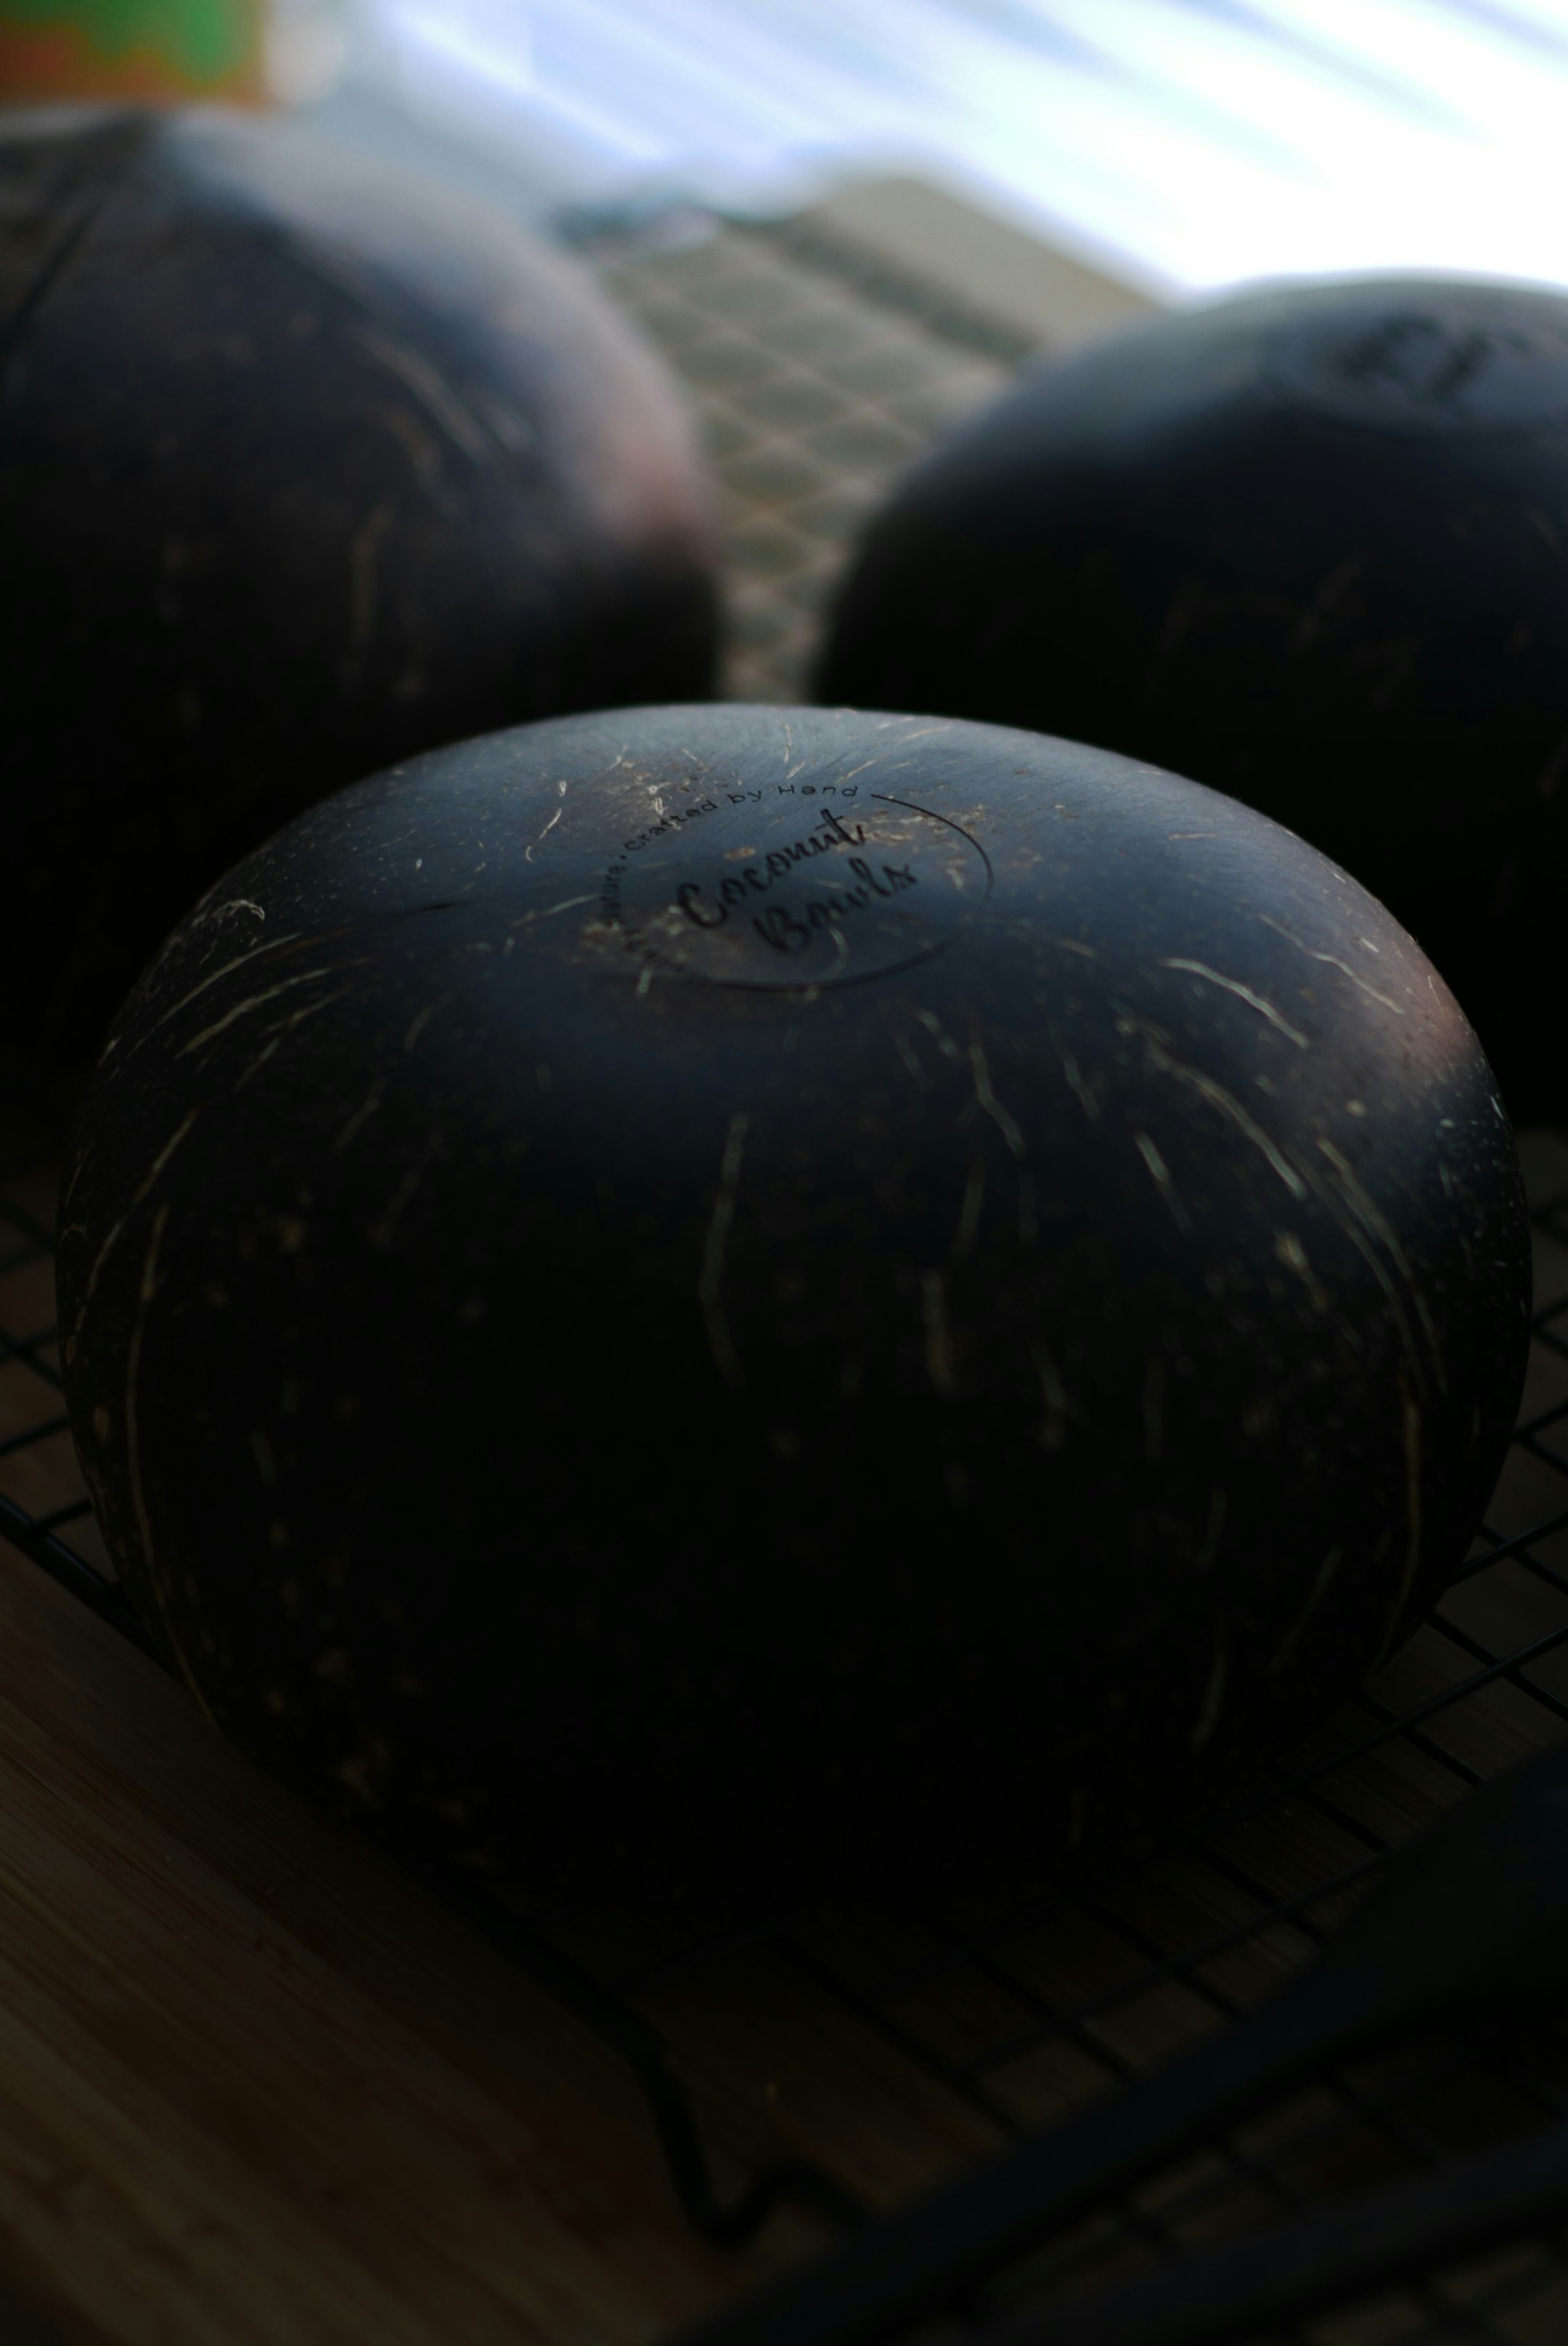 black round ball on brown wooden table